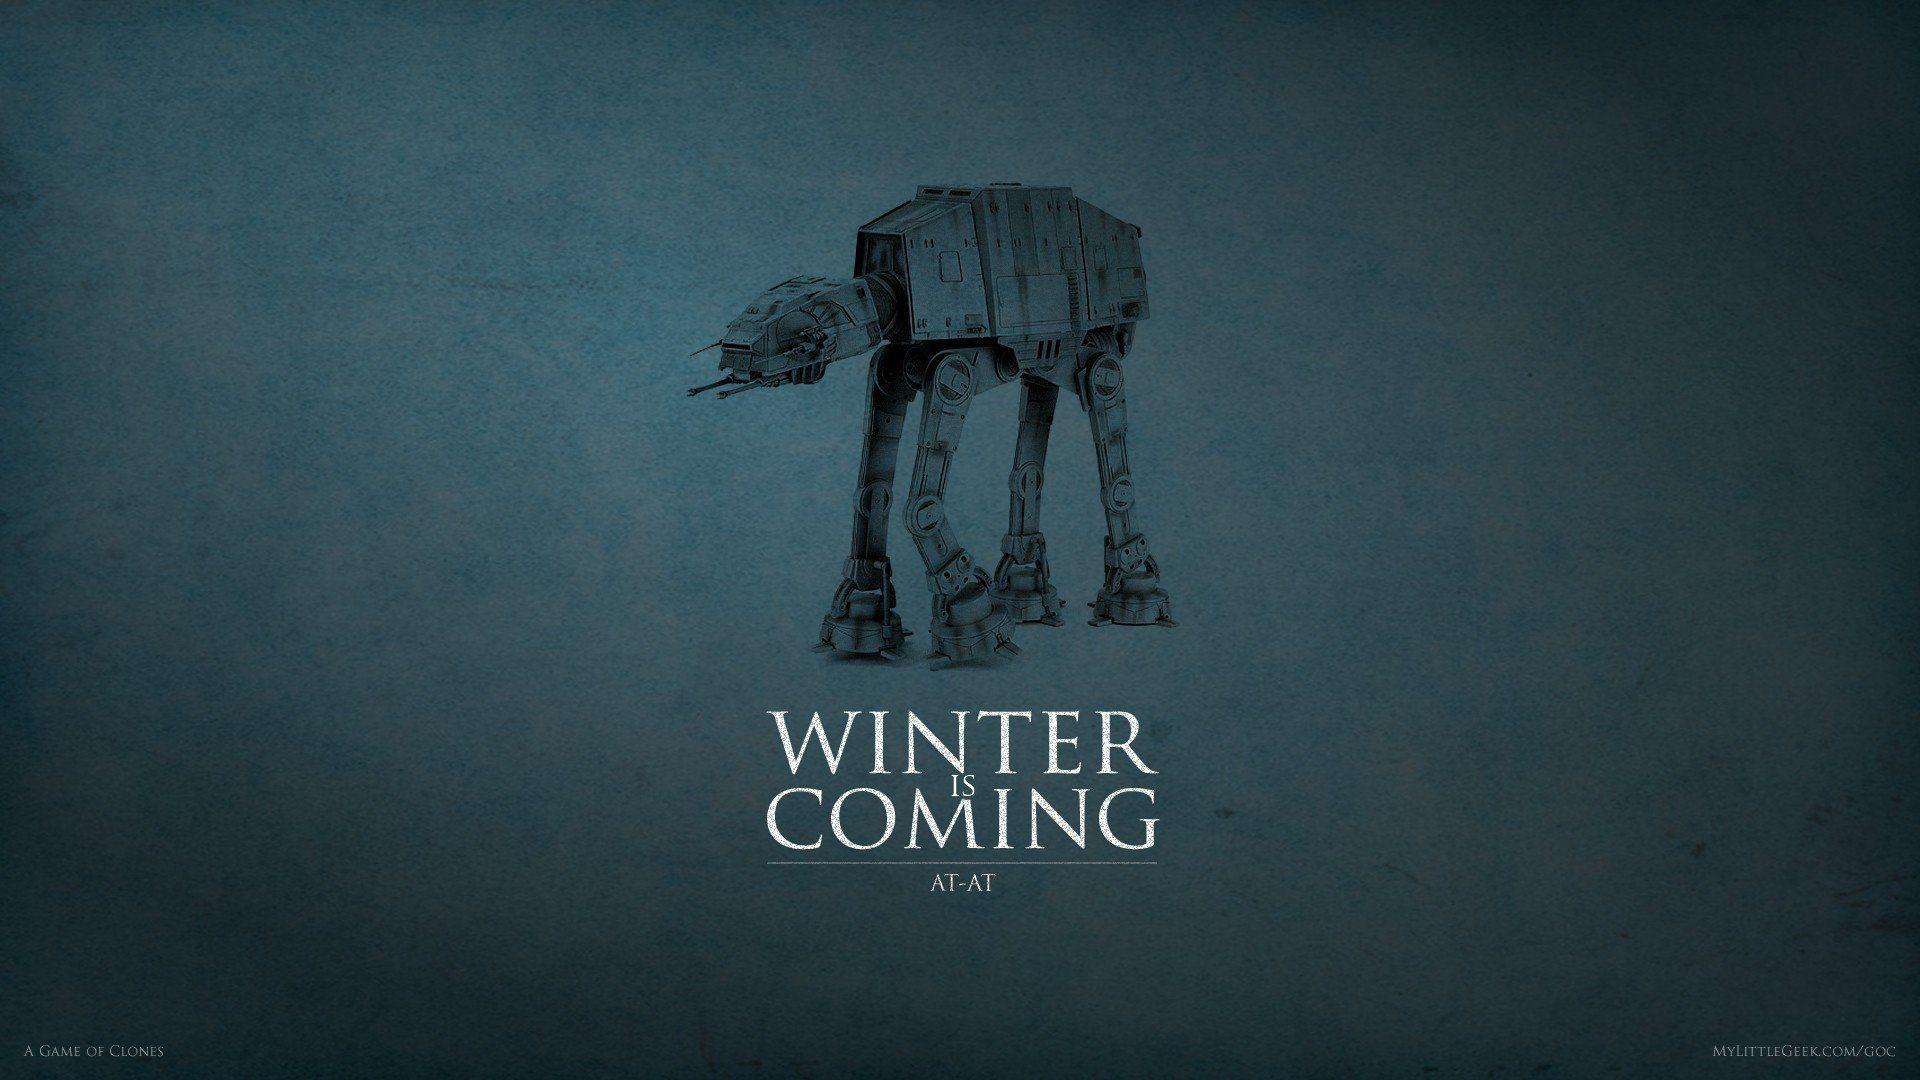 Game Of Thrones House Stark Star Wars AT AT